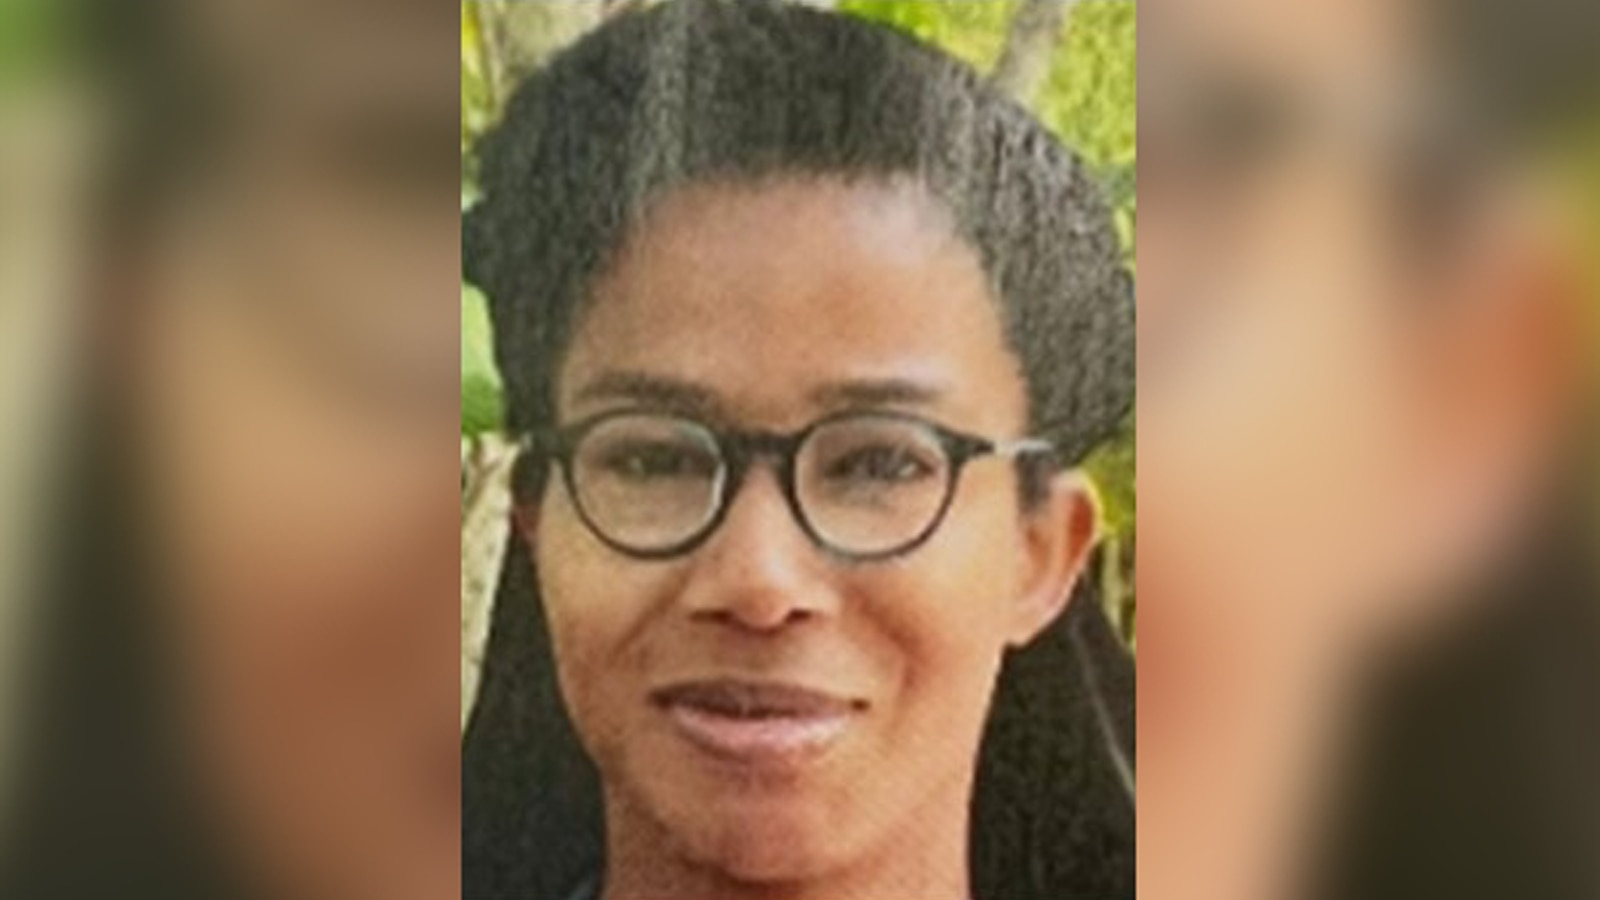 Search for Chicago woman who went missing in the Bahamas expands: Police [Video]